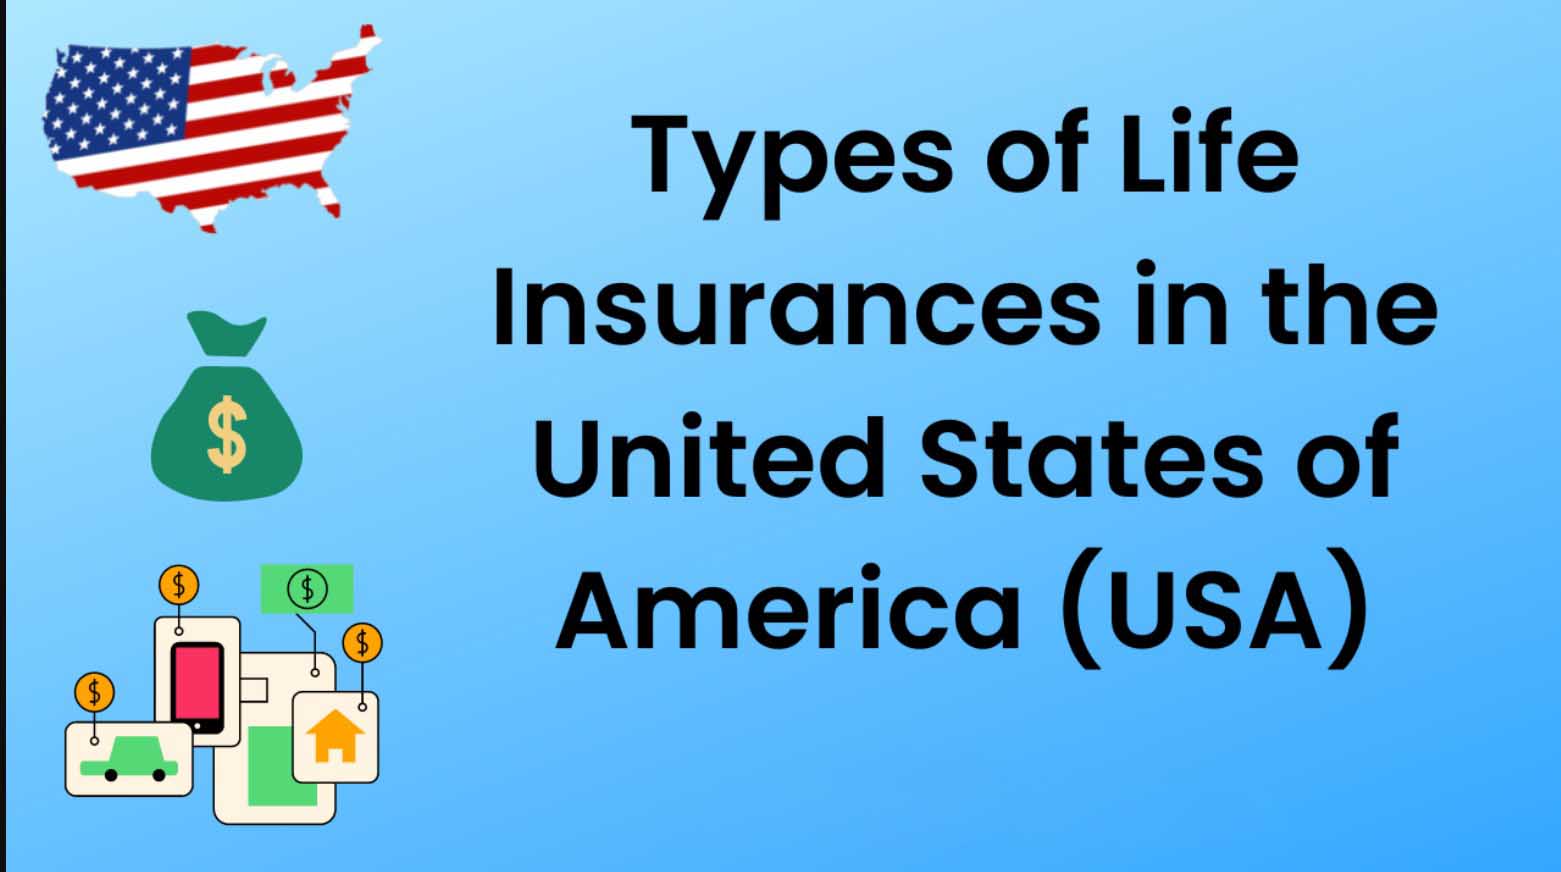 Types-of-Life-Insurances-in-the-United-States-of-America-USA